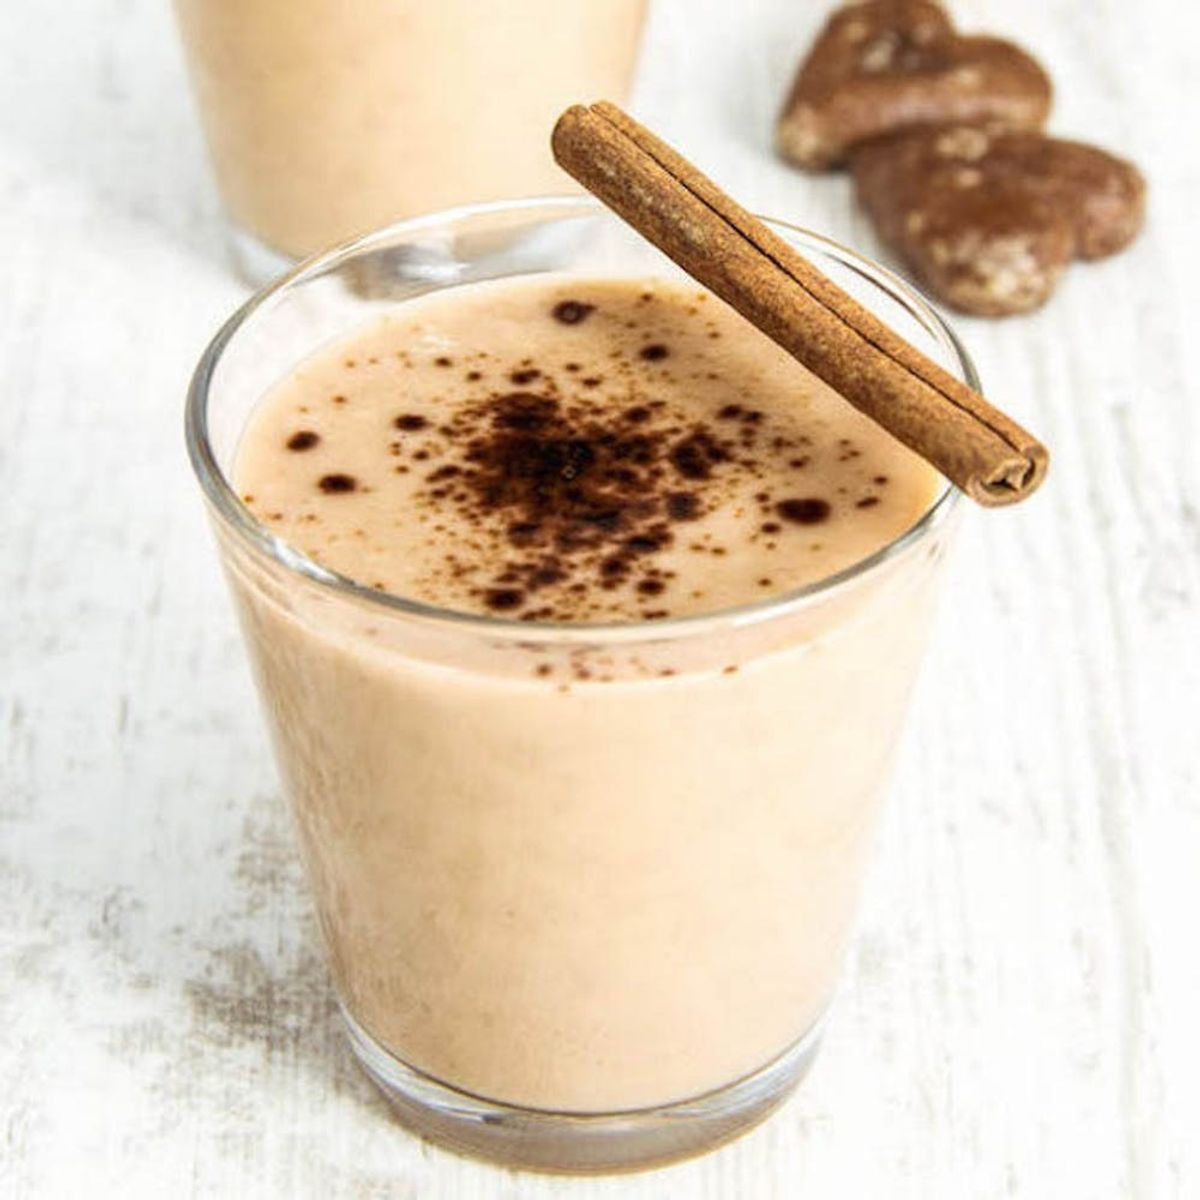 9 Warm Smoothie Recipes That Will Completely Change Your Breakfast Game